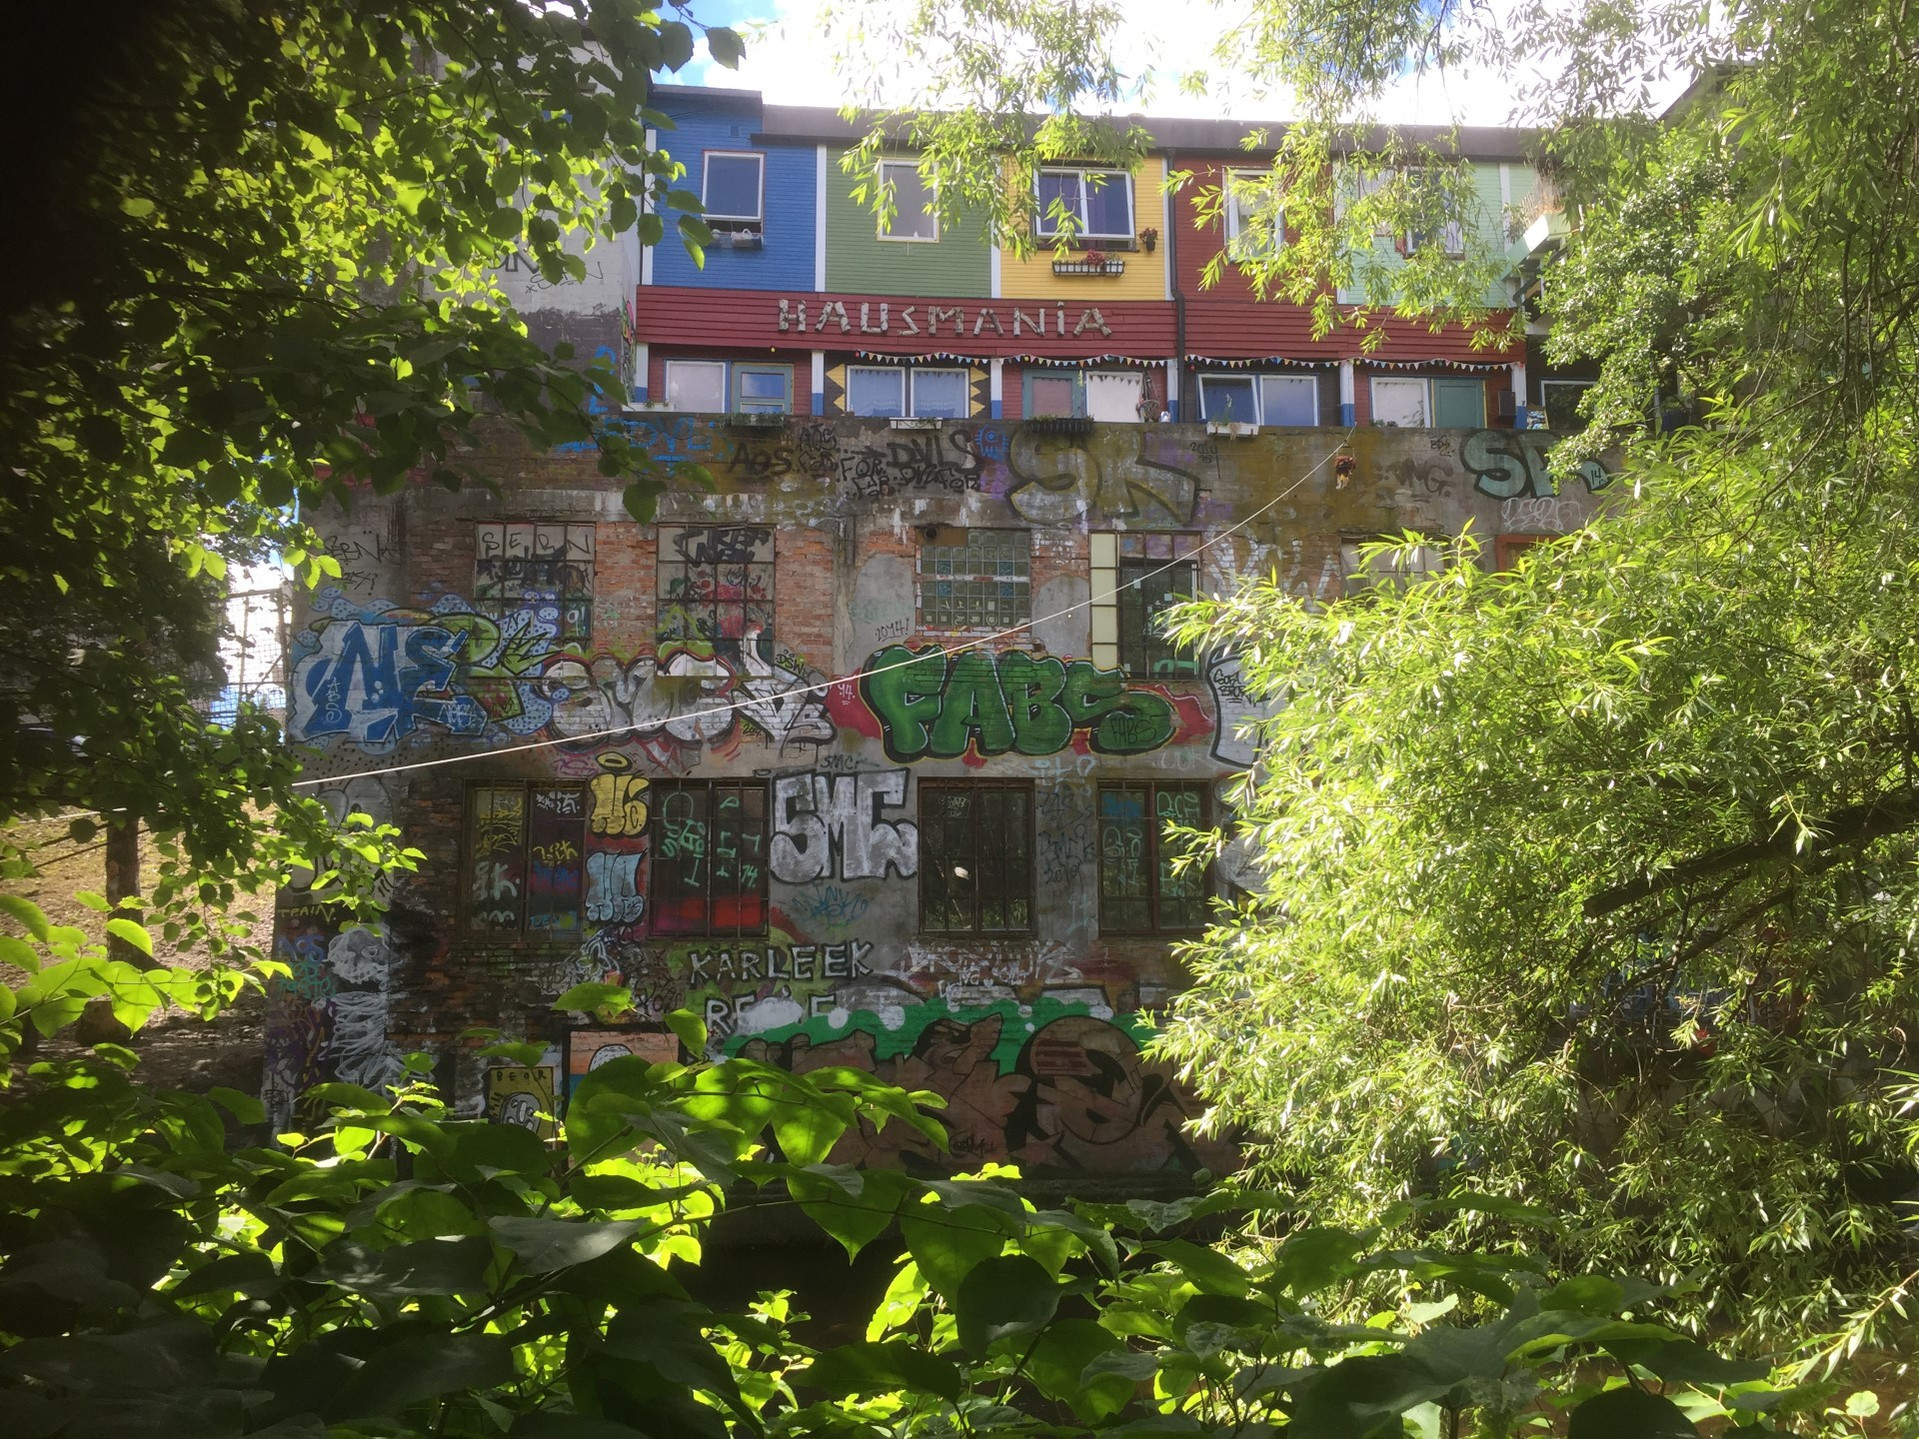 Colour photo of the backside of Hausmania culture house with a wall covered in graffiti. Seen through green tree branches.
